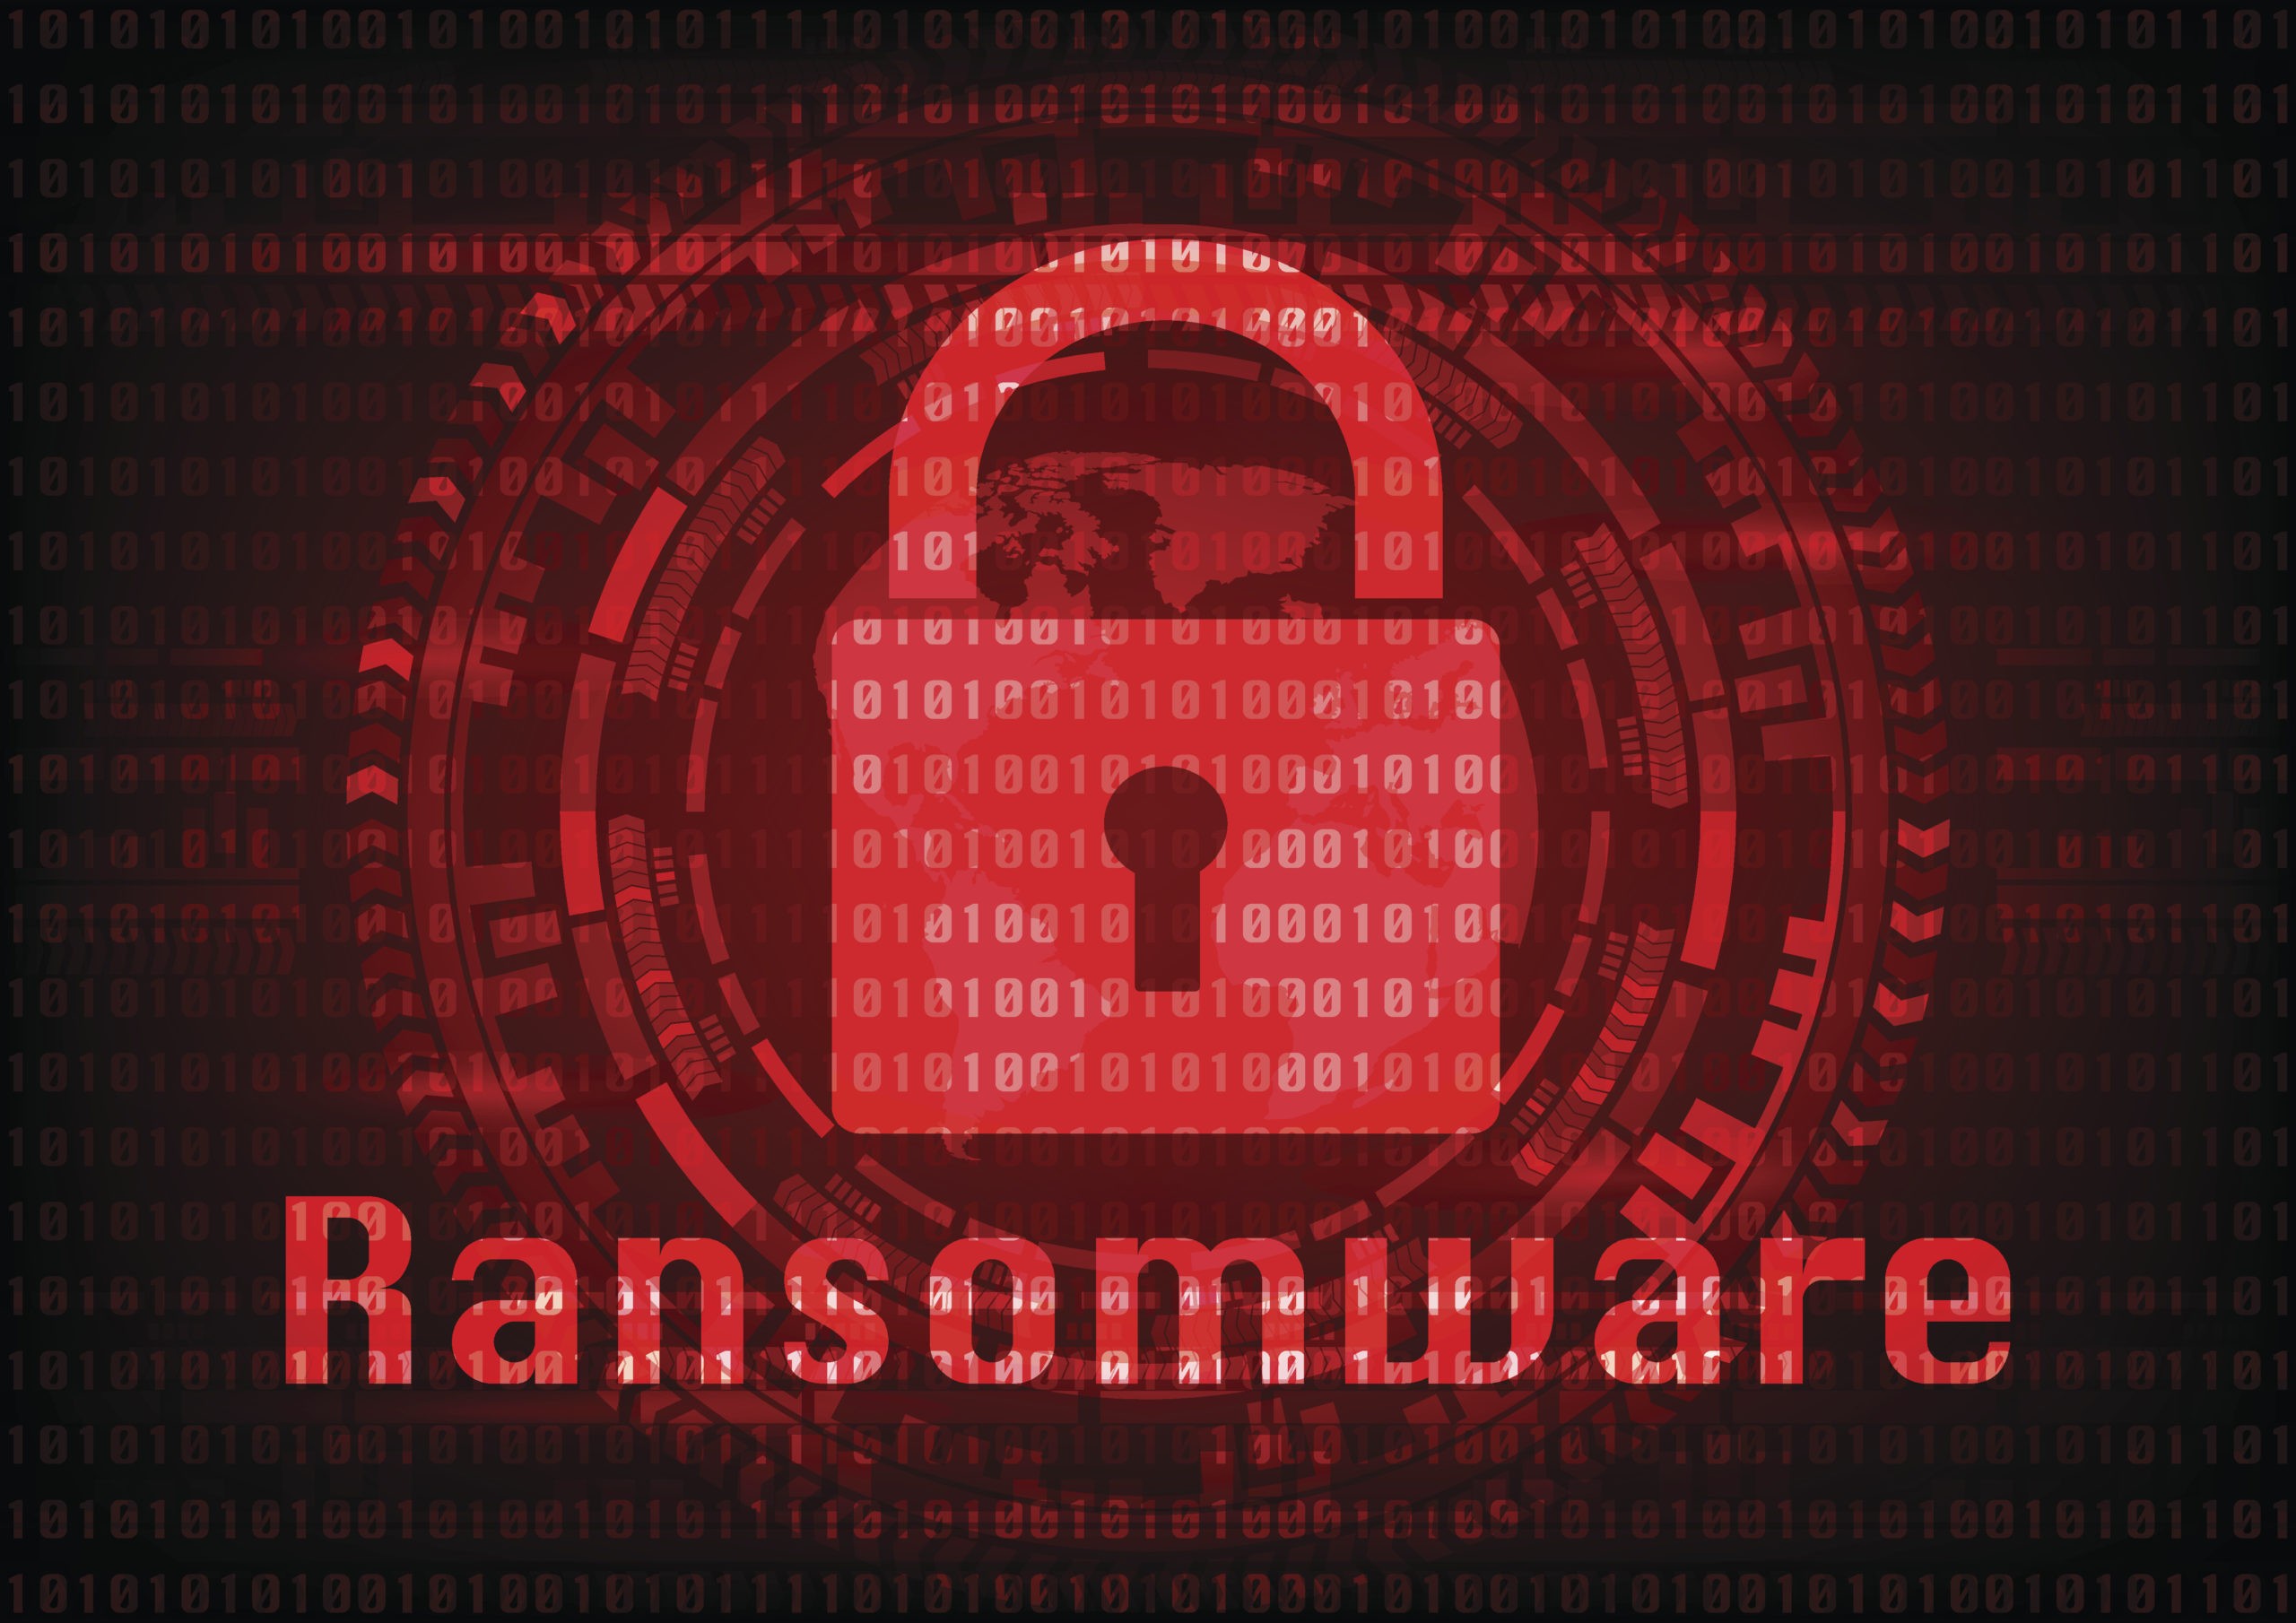 disaster recovery and ransomware